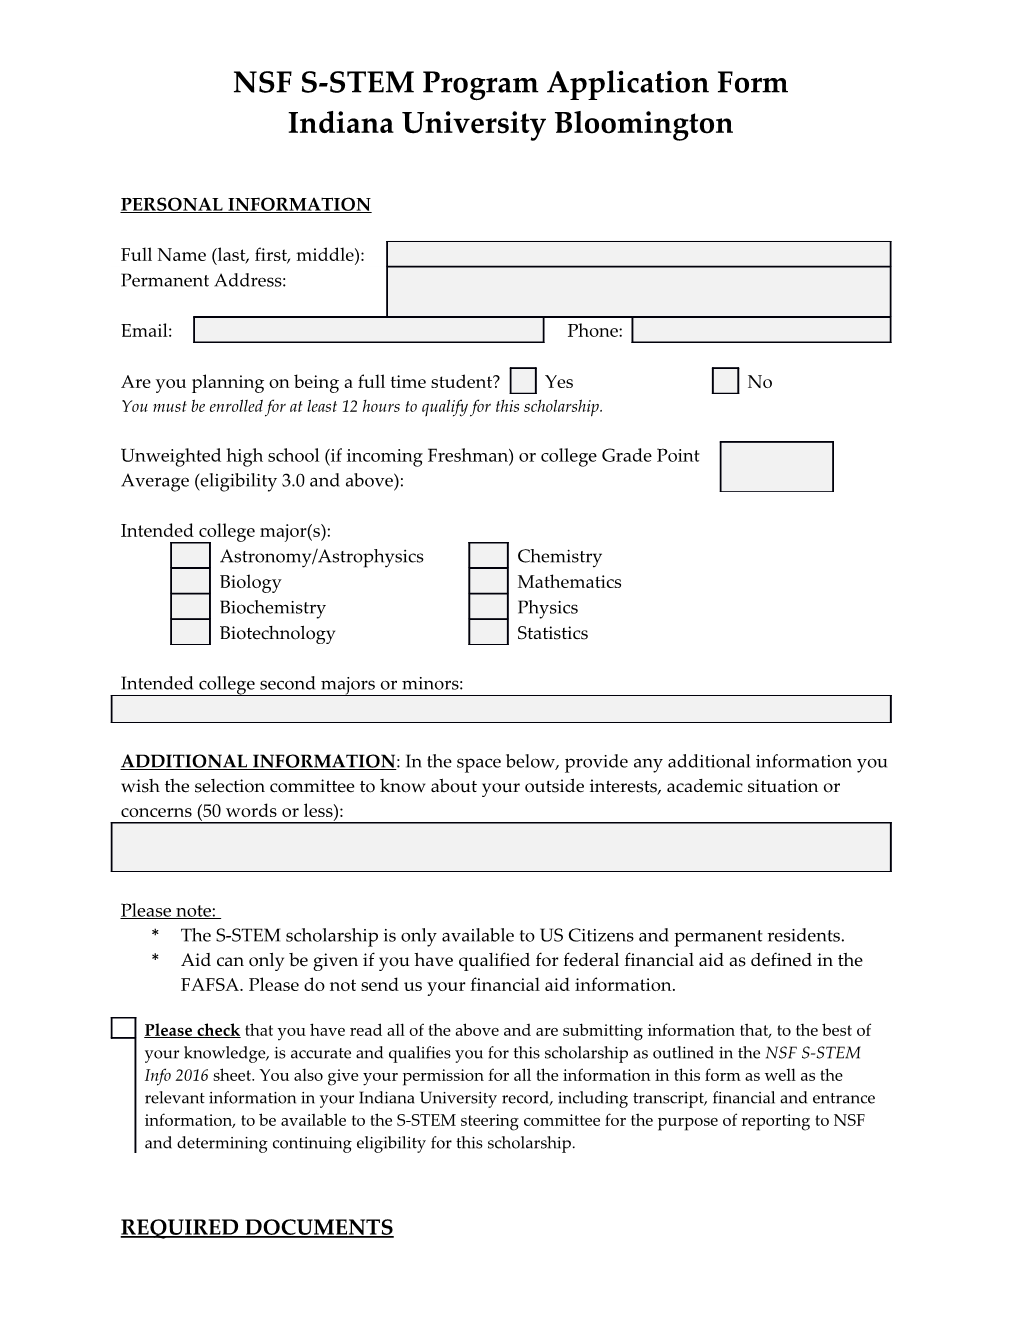 Personal Information s28